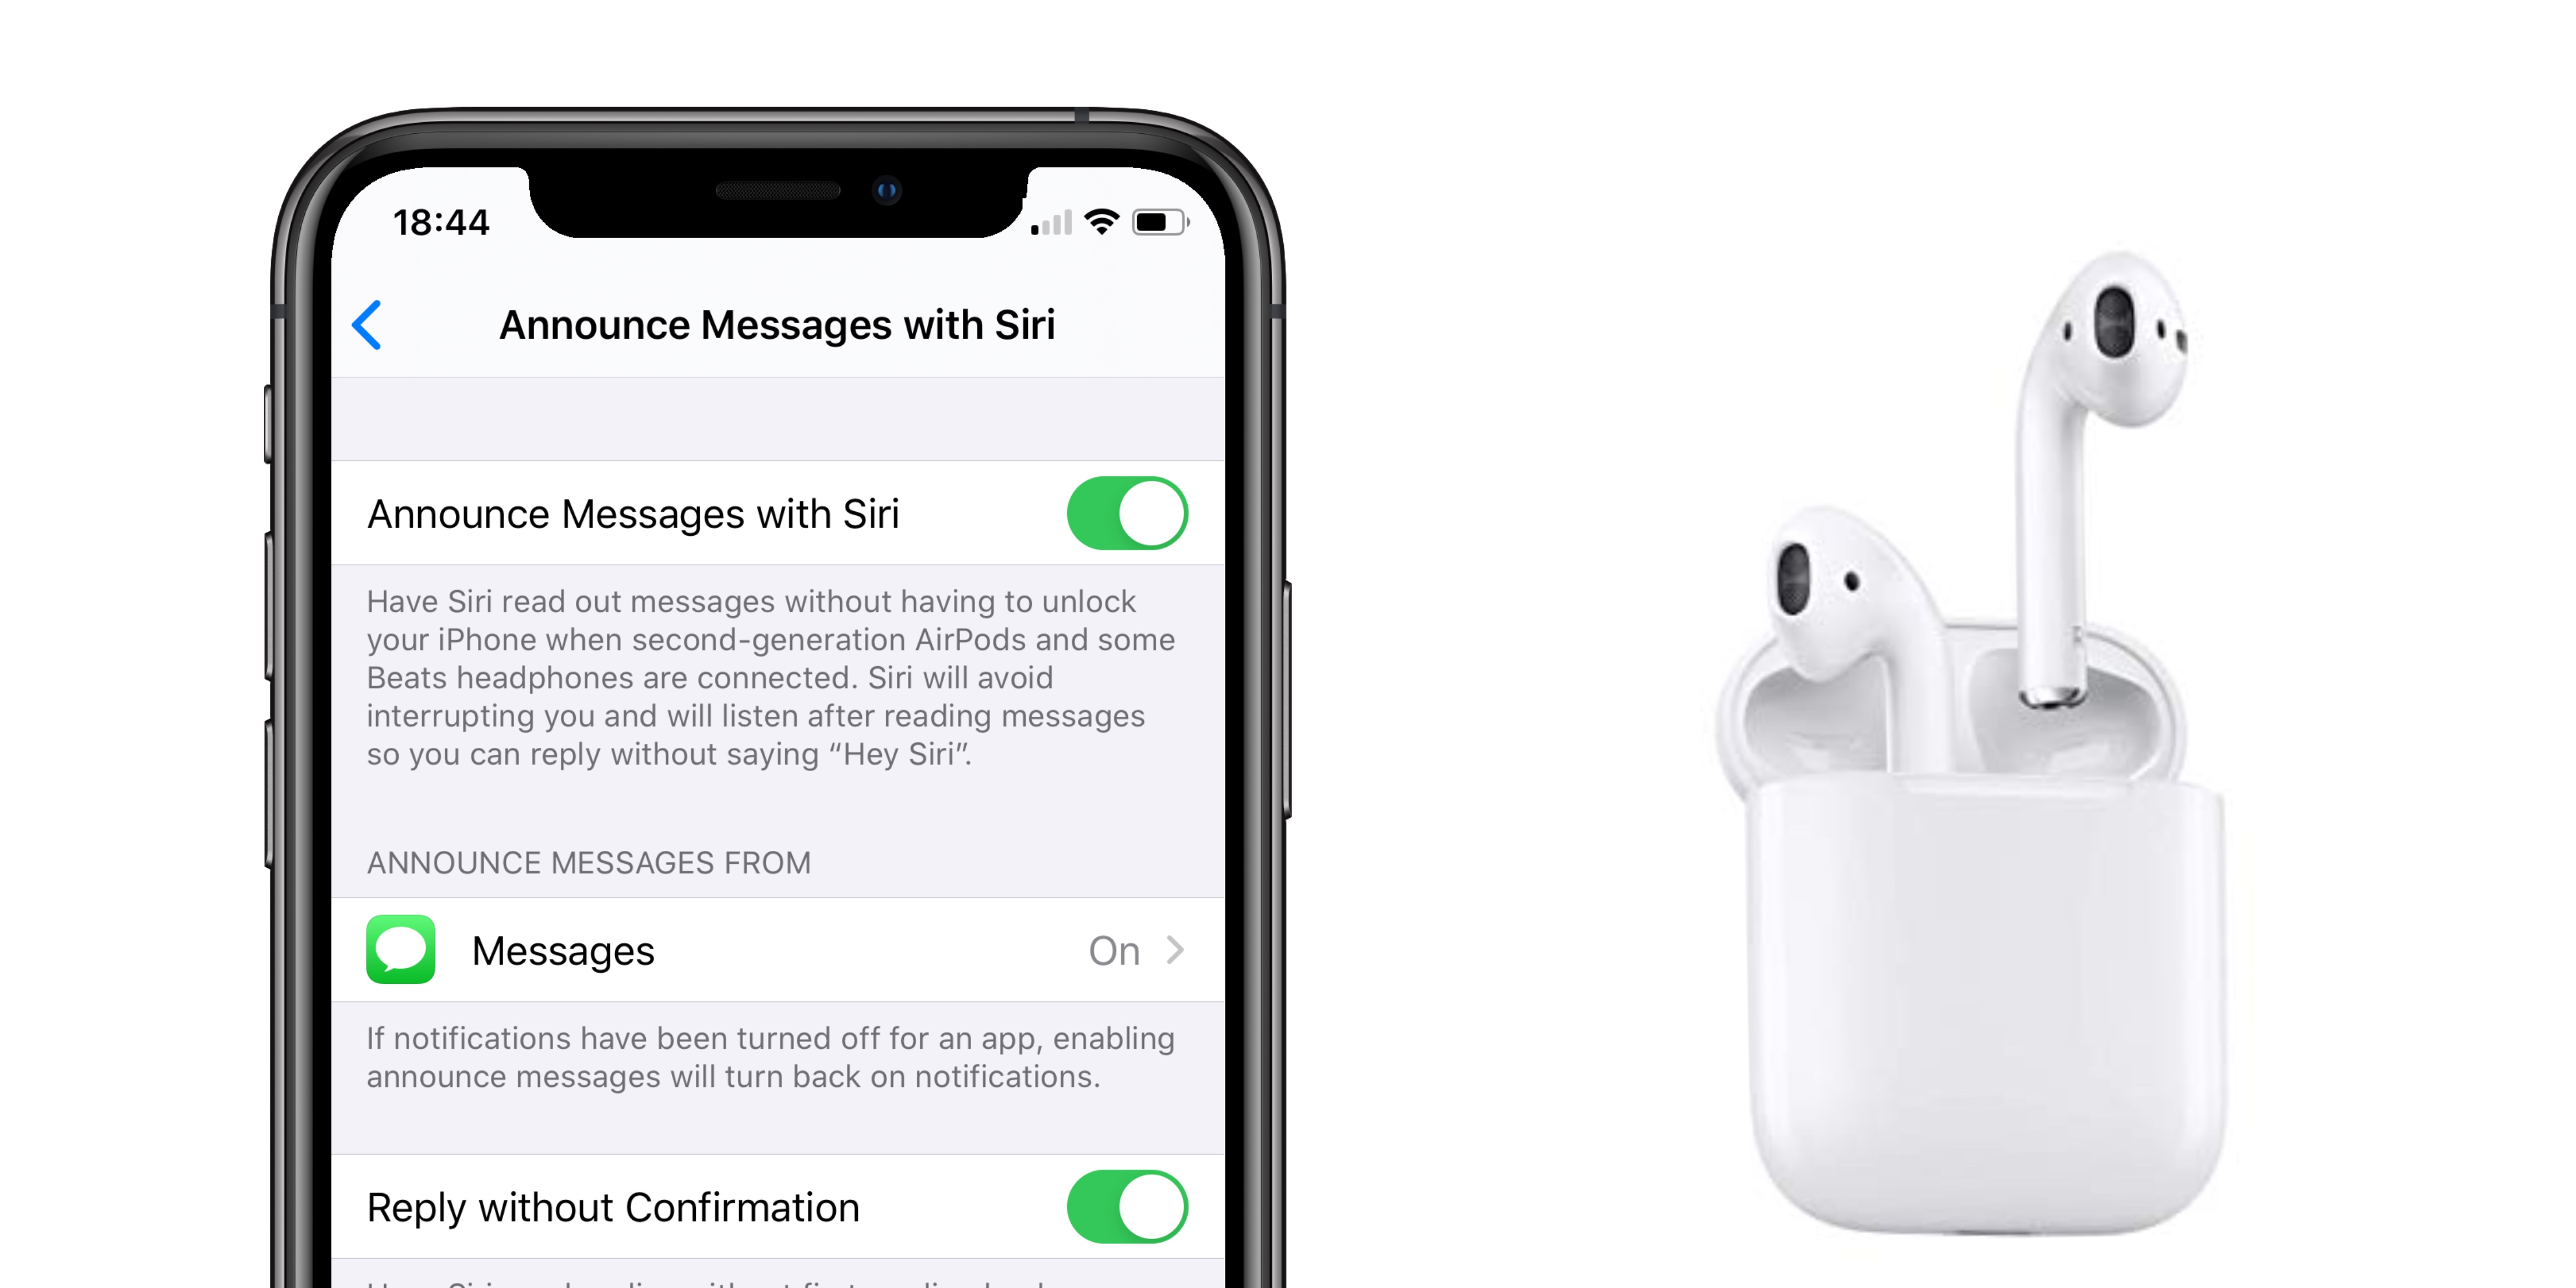 Onkel eller Mister Analytisk Eastern Announce Messages with Siri' feature returns for AirPods owners in iOS 13.2  - 9to5Mac